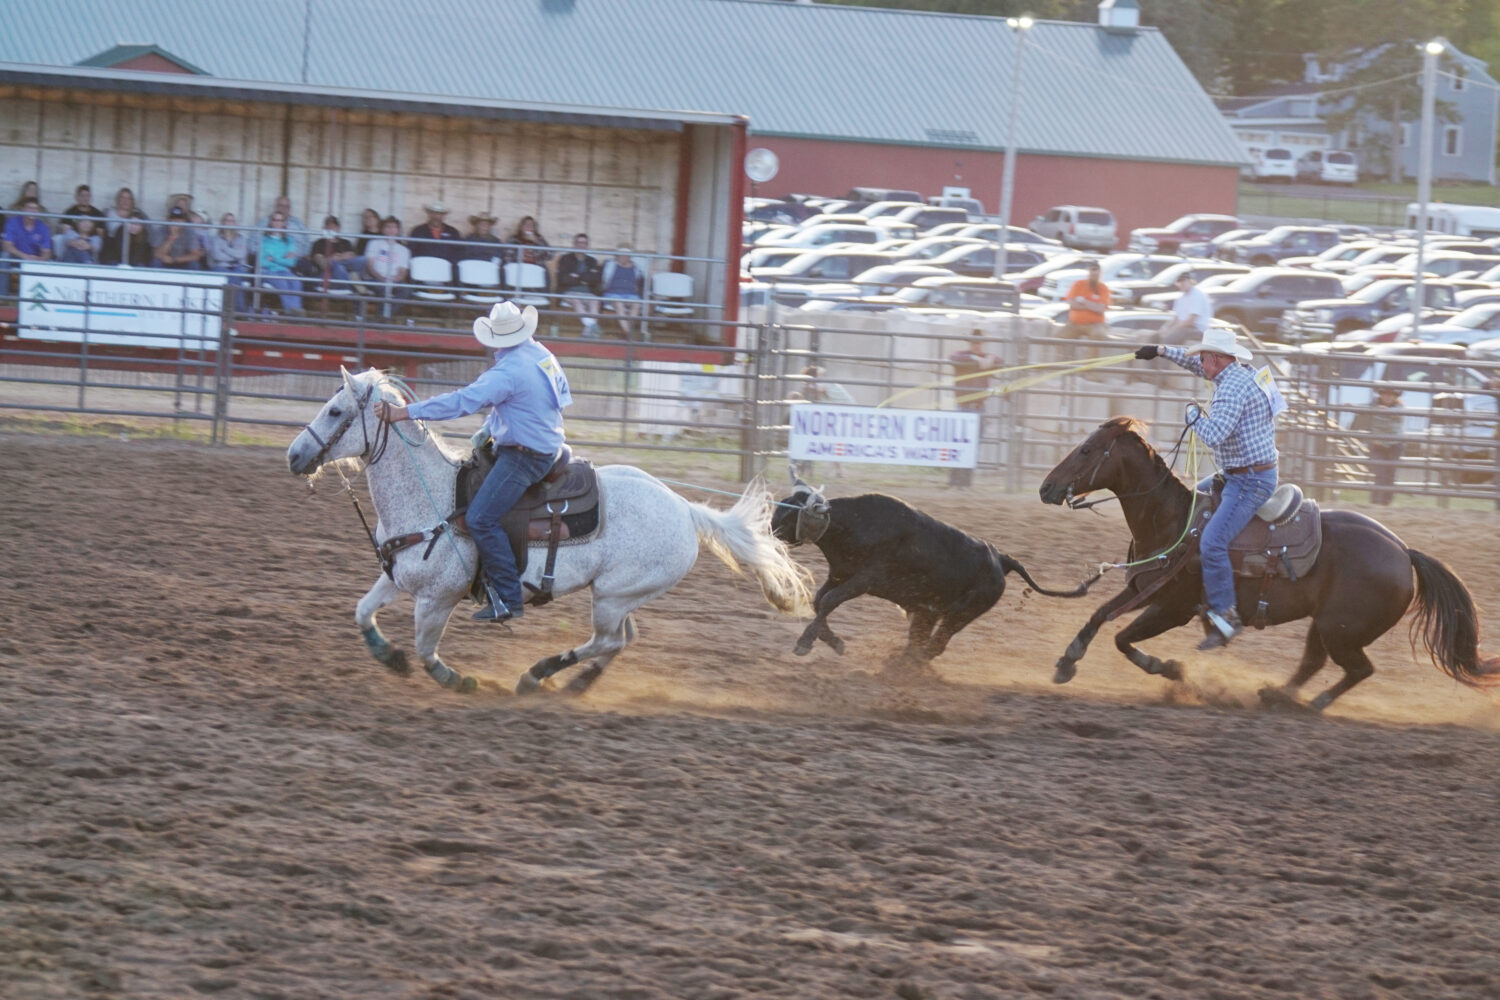 Wisconsin River Pro Rodeo draws attendees and contestants from throughout the U.S.